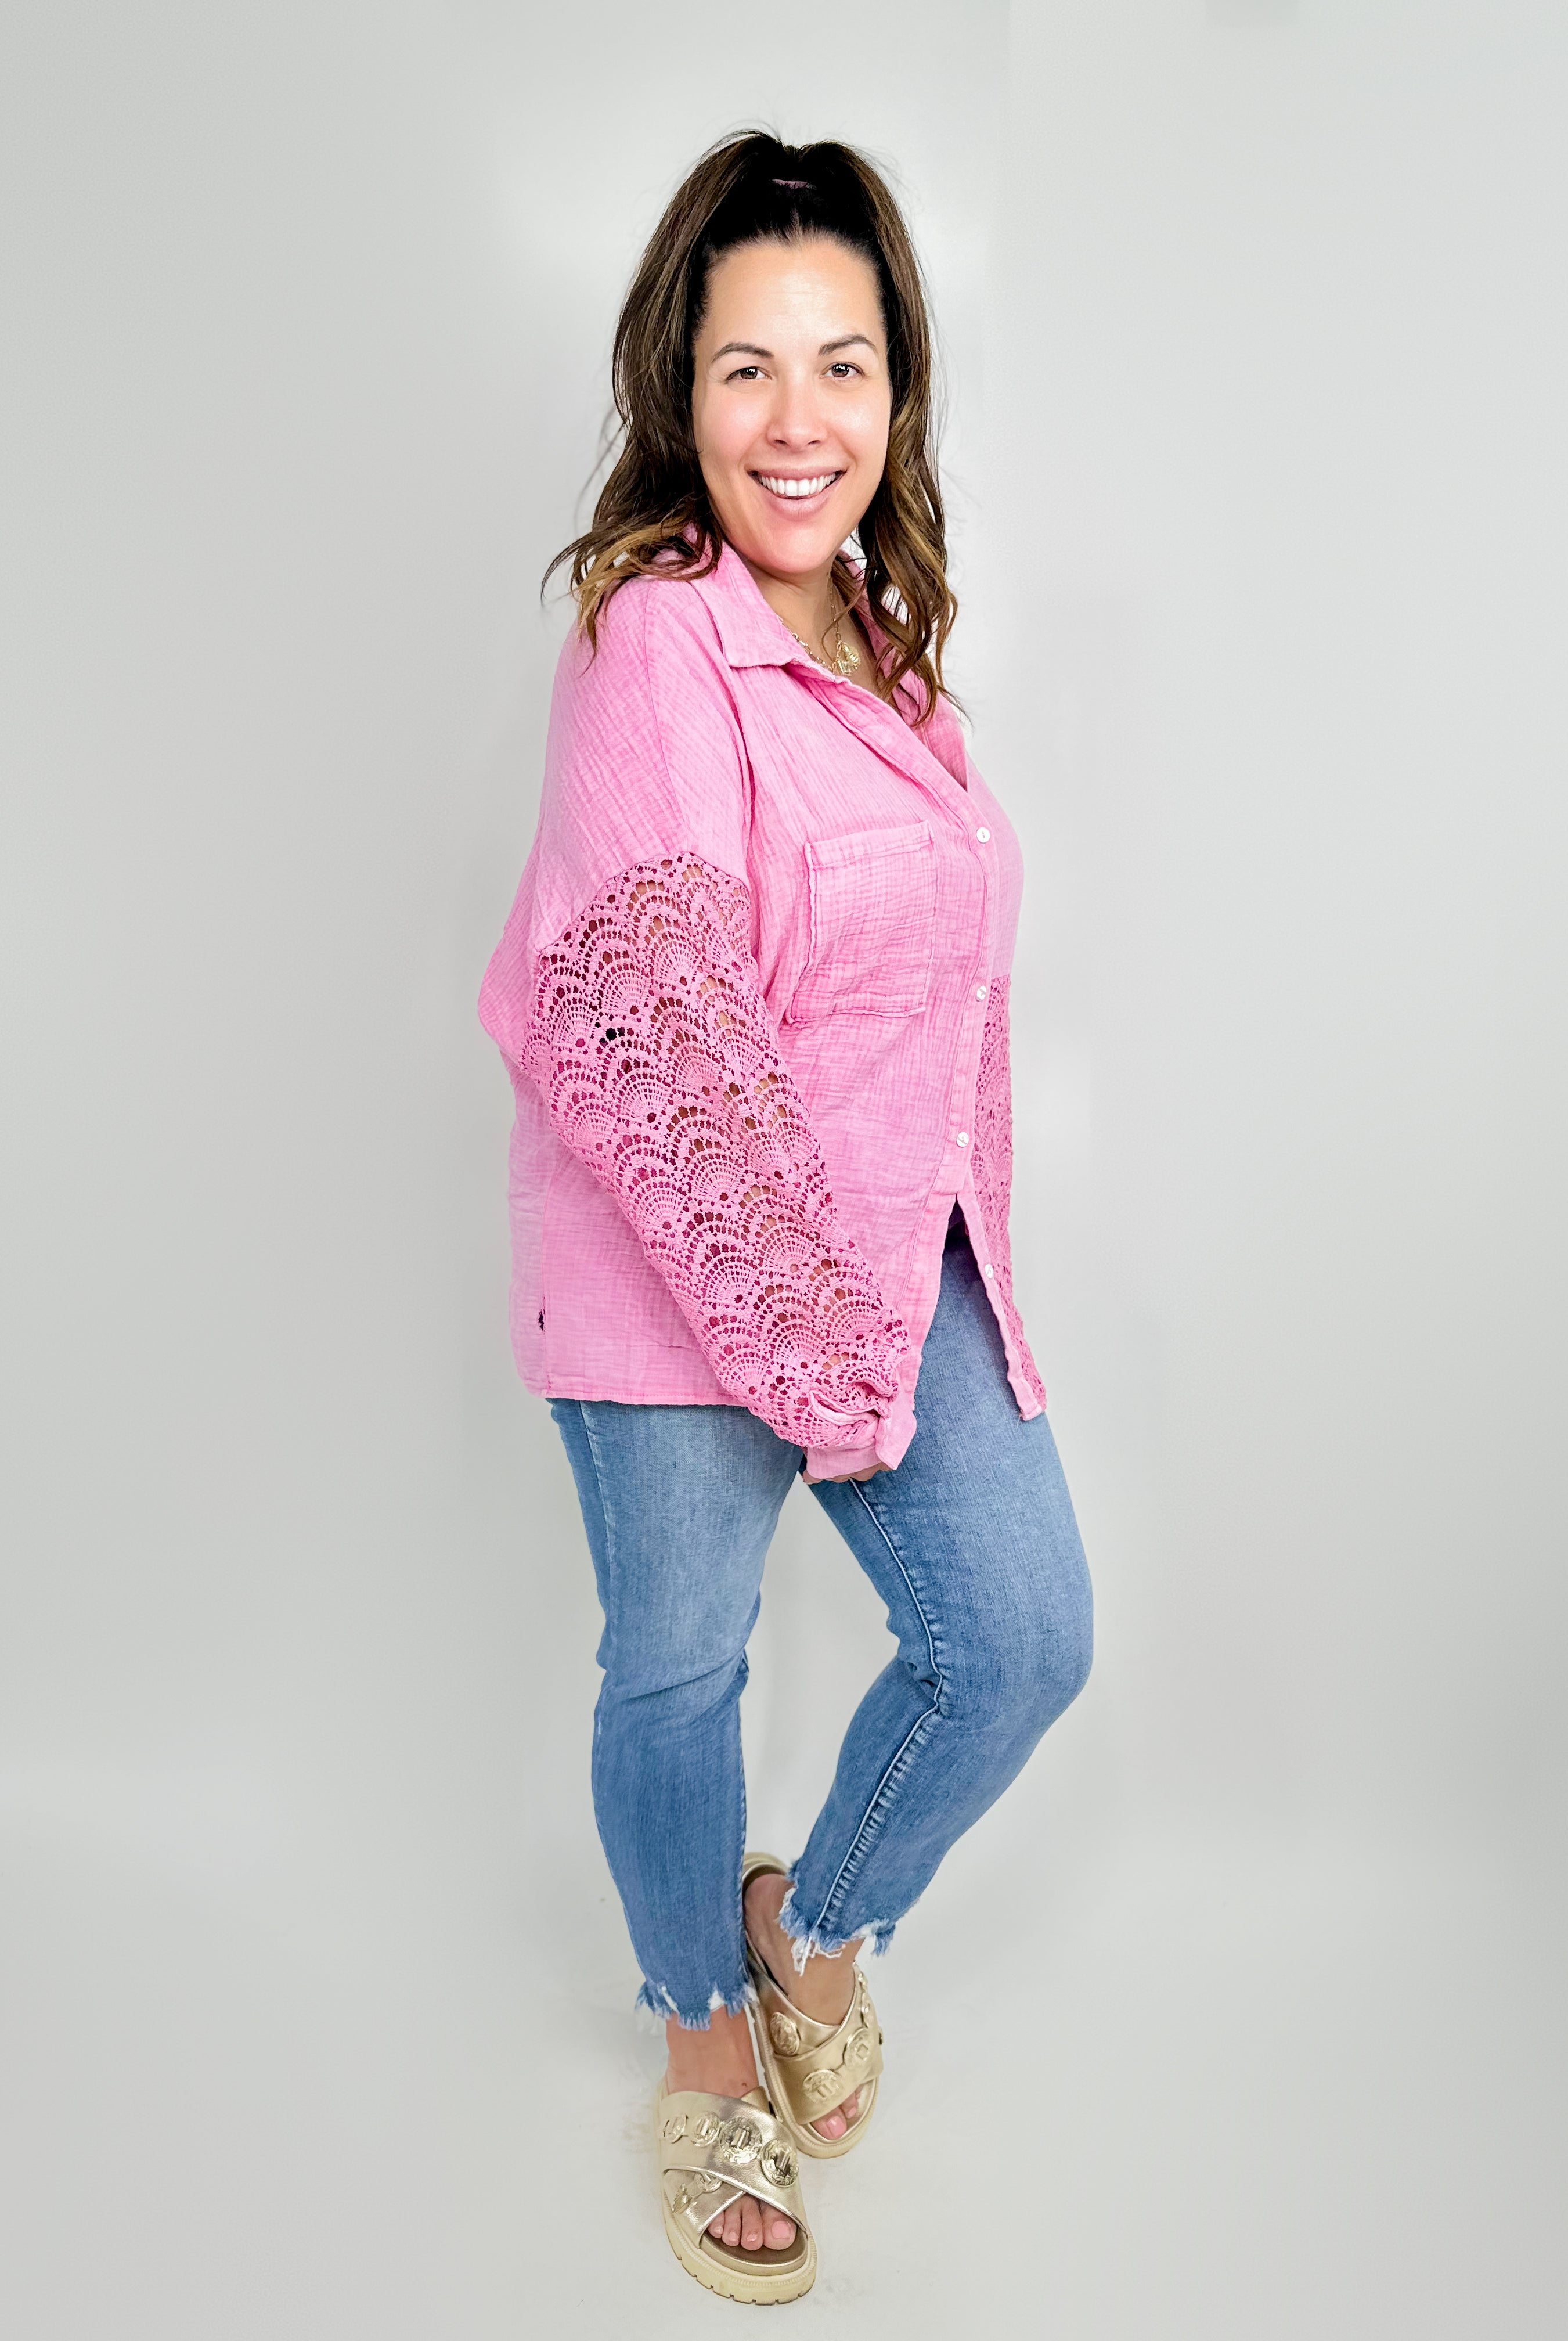 Switching Gears Top-120 Long Sleeve Tops-Bibi-Heathered Boho Boutique, Women's Fashion and Accessories in Palmetto, FL